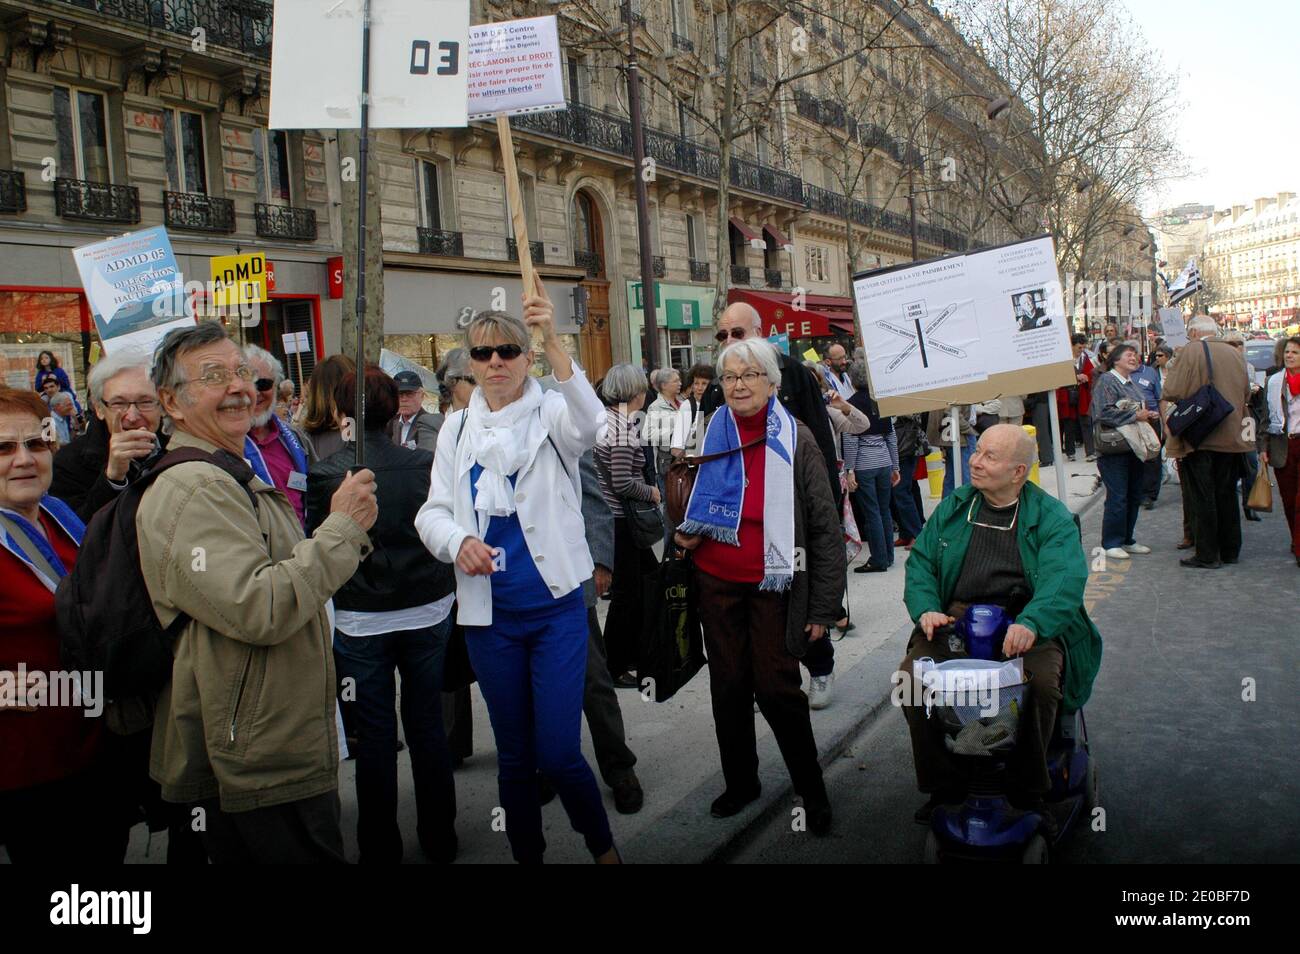 People gathering to support the 'right-to-die' for the legalization of euthanasia organized by ADMD (Association for The Right-to-Die in Dignity) at the Place of Republic in Paris, France, on March 24, 2012. Anne Hidalgo, Mireille Dumas attend the rallye. Photo by Alain Apaydin/ABACAPRESS.COM Stock Photo